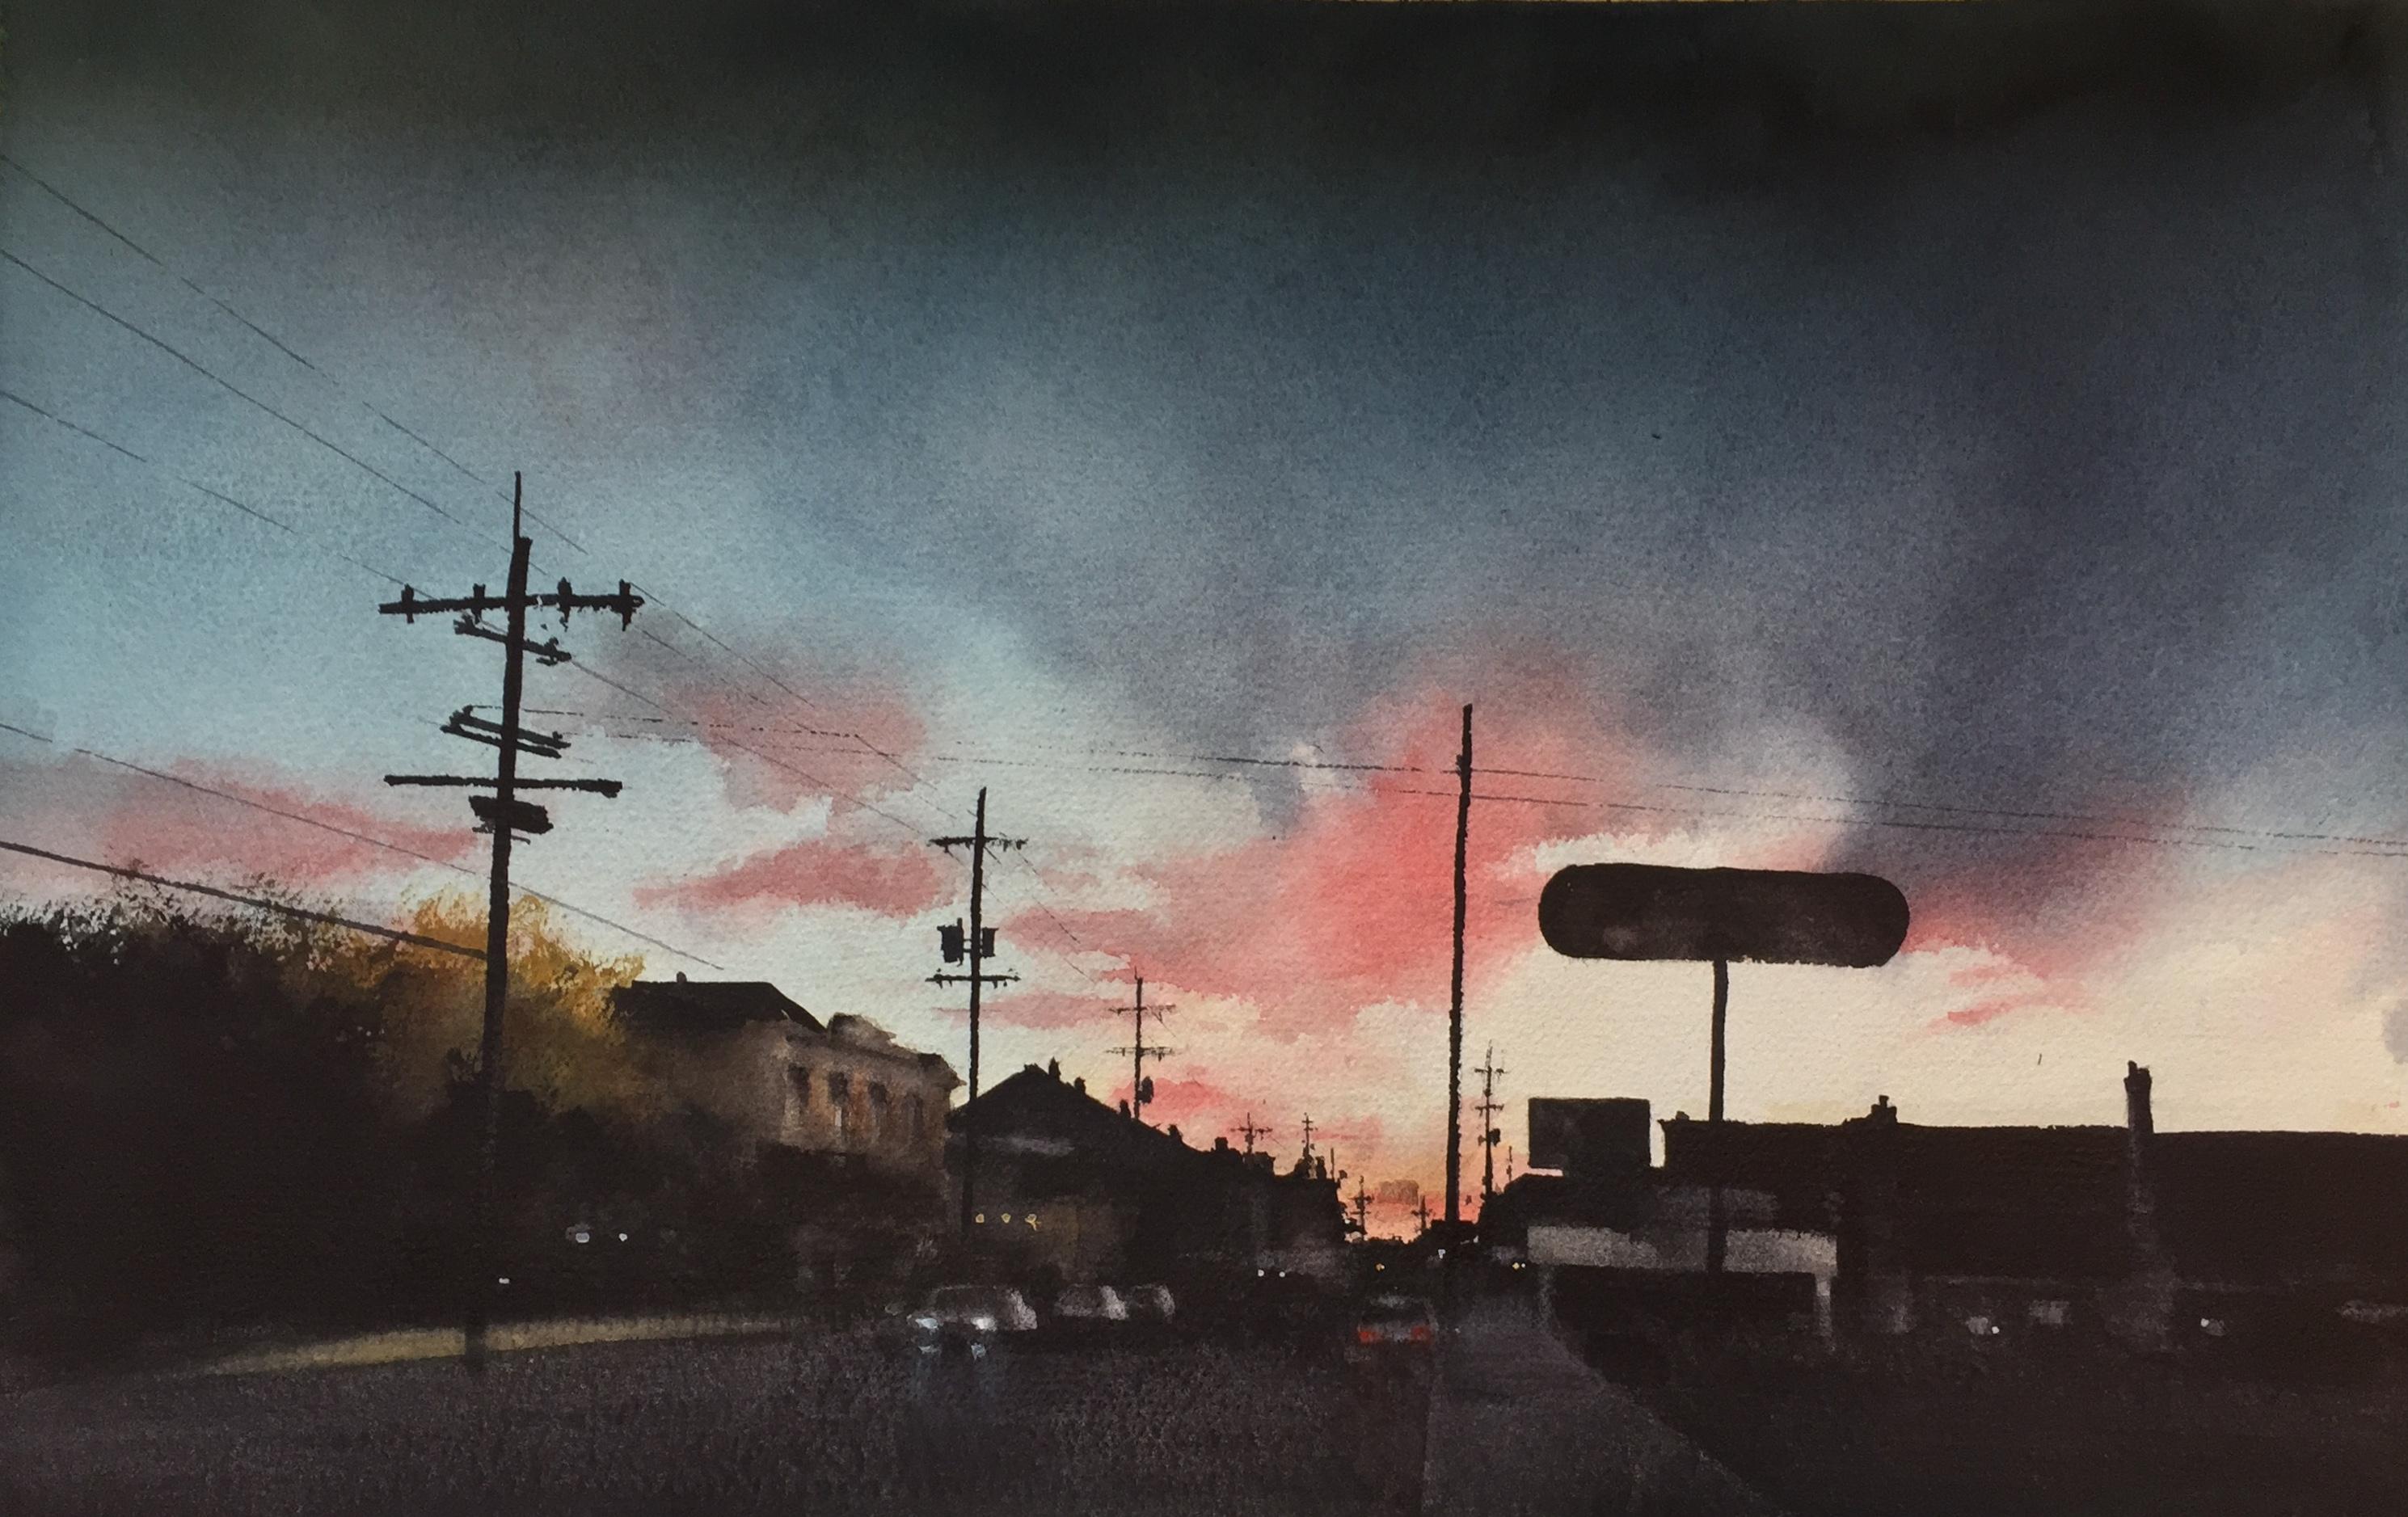 Watercolor on paper street scene of New Orleans by Sean Friloux. FRAMED dimensions are 19 x 26 1/3 inches. Well known for his PleinAir and Studio landscapes. Friloux is a Louisiana native living in New Orleans. In addition to watercolor he is